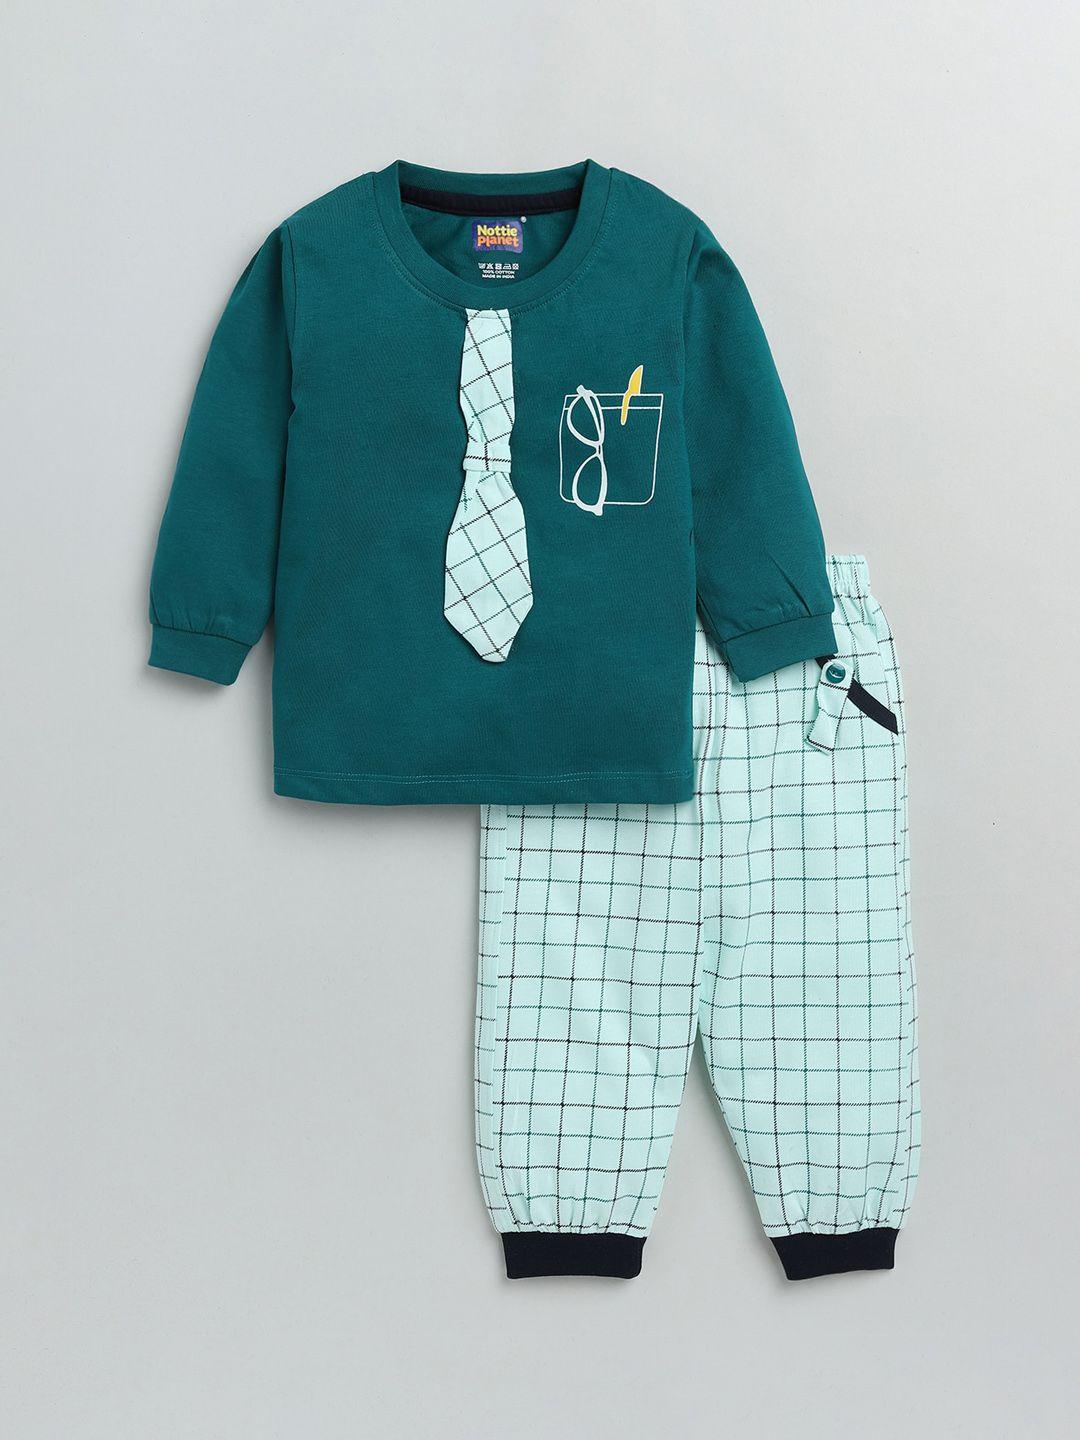 nottie planet boys teal & blue printed cotton t-shirt with trousers